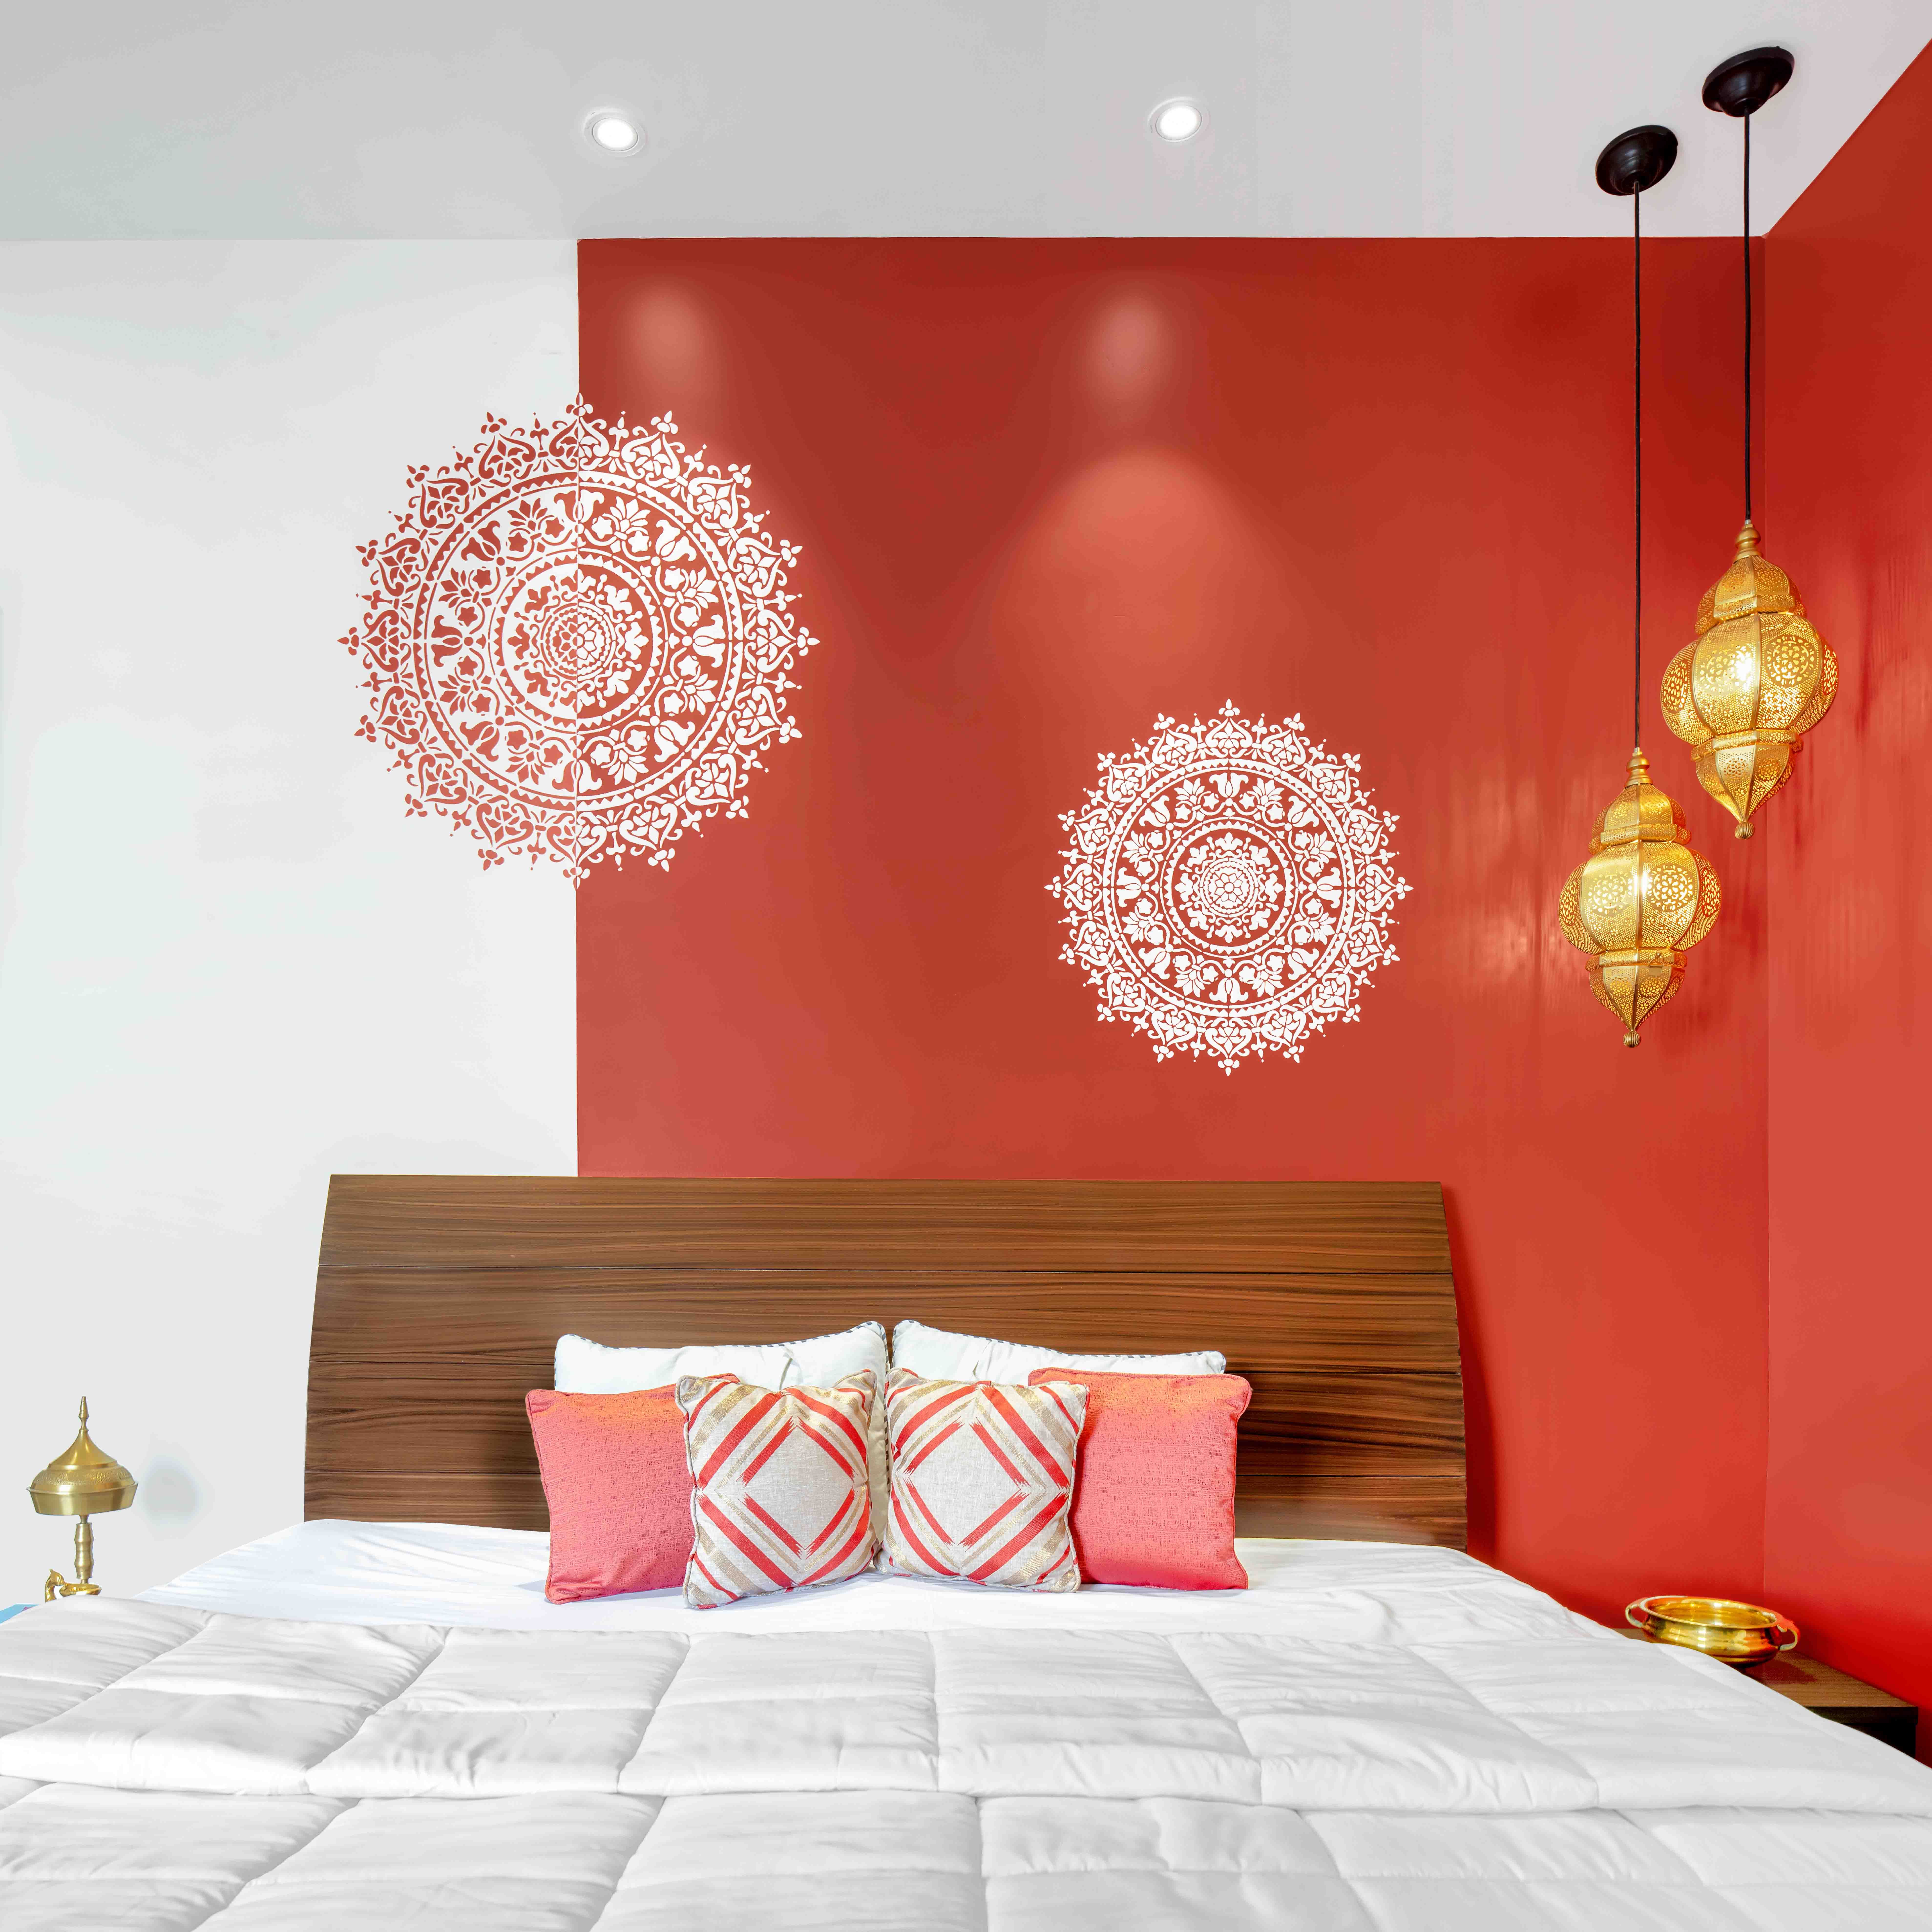 Modern Red And White Bedroom Wall Paint Design With Geometric Motifs